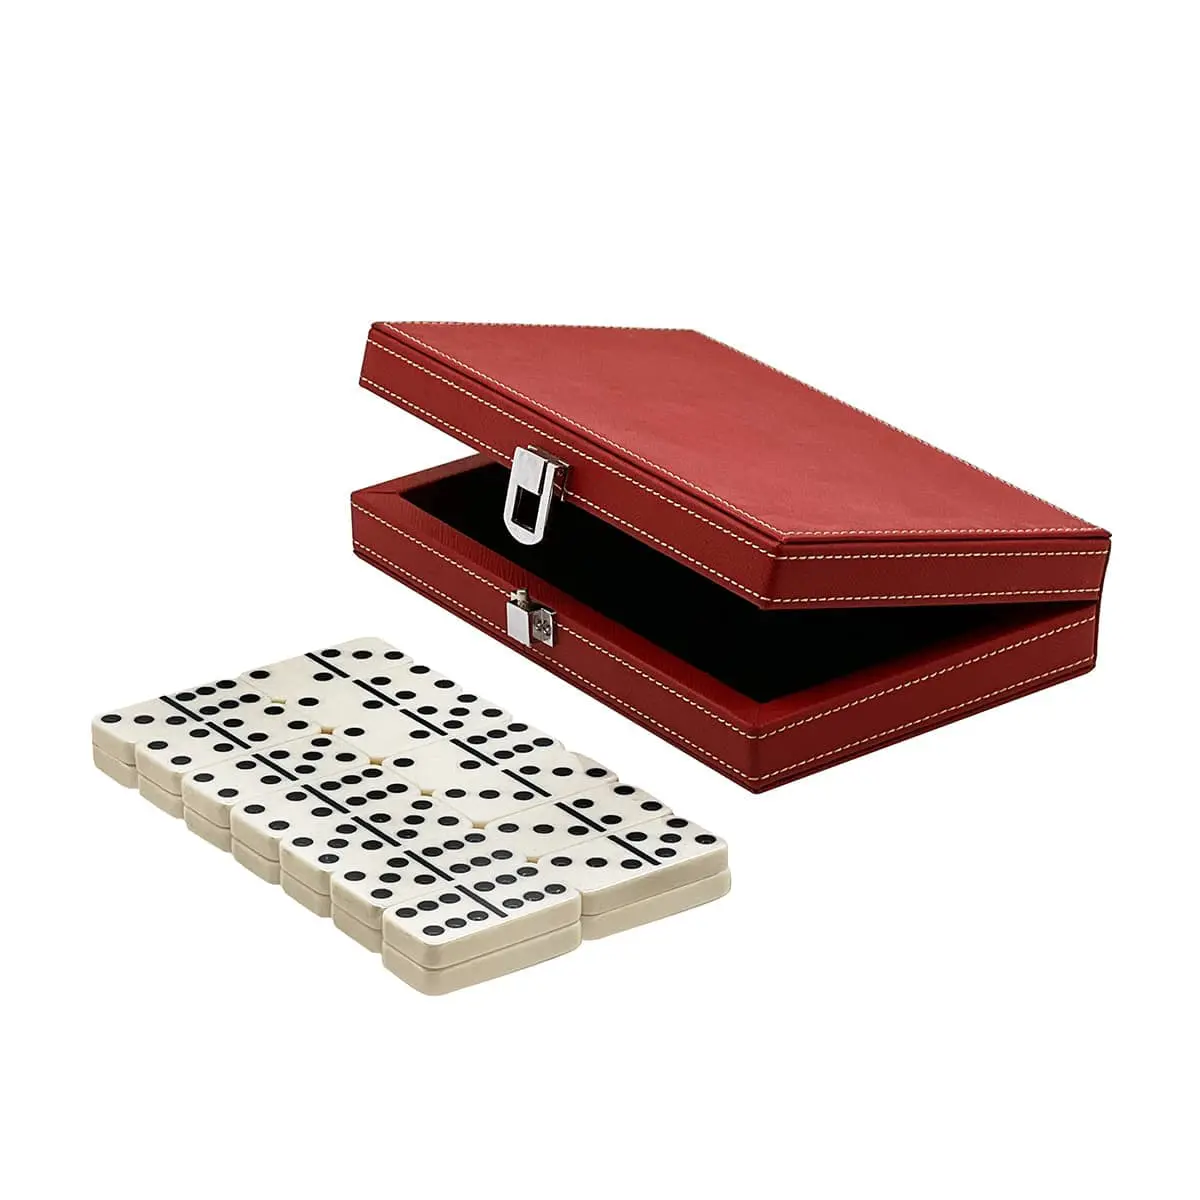 Double 6 Domino Set in Leatherette Case